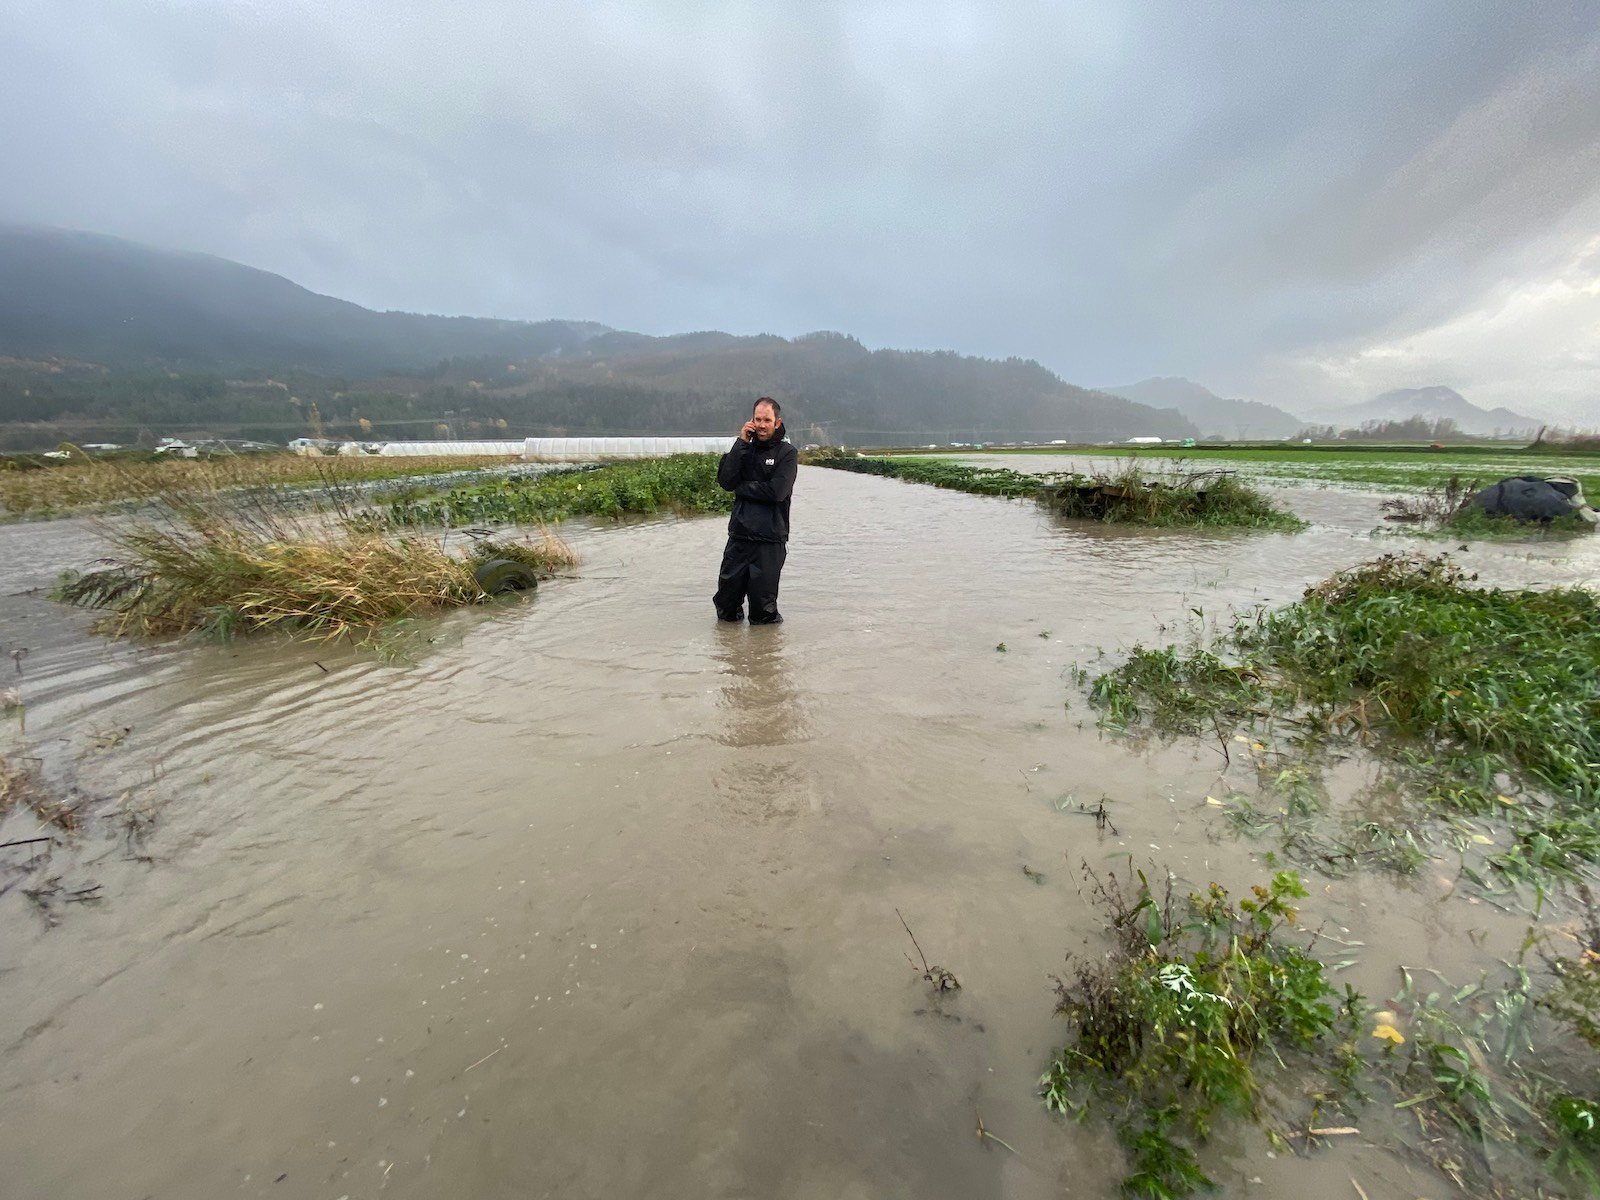 As the floodwaters rose, this simple solution kept a B.C. farmer’s fields intact - cover